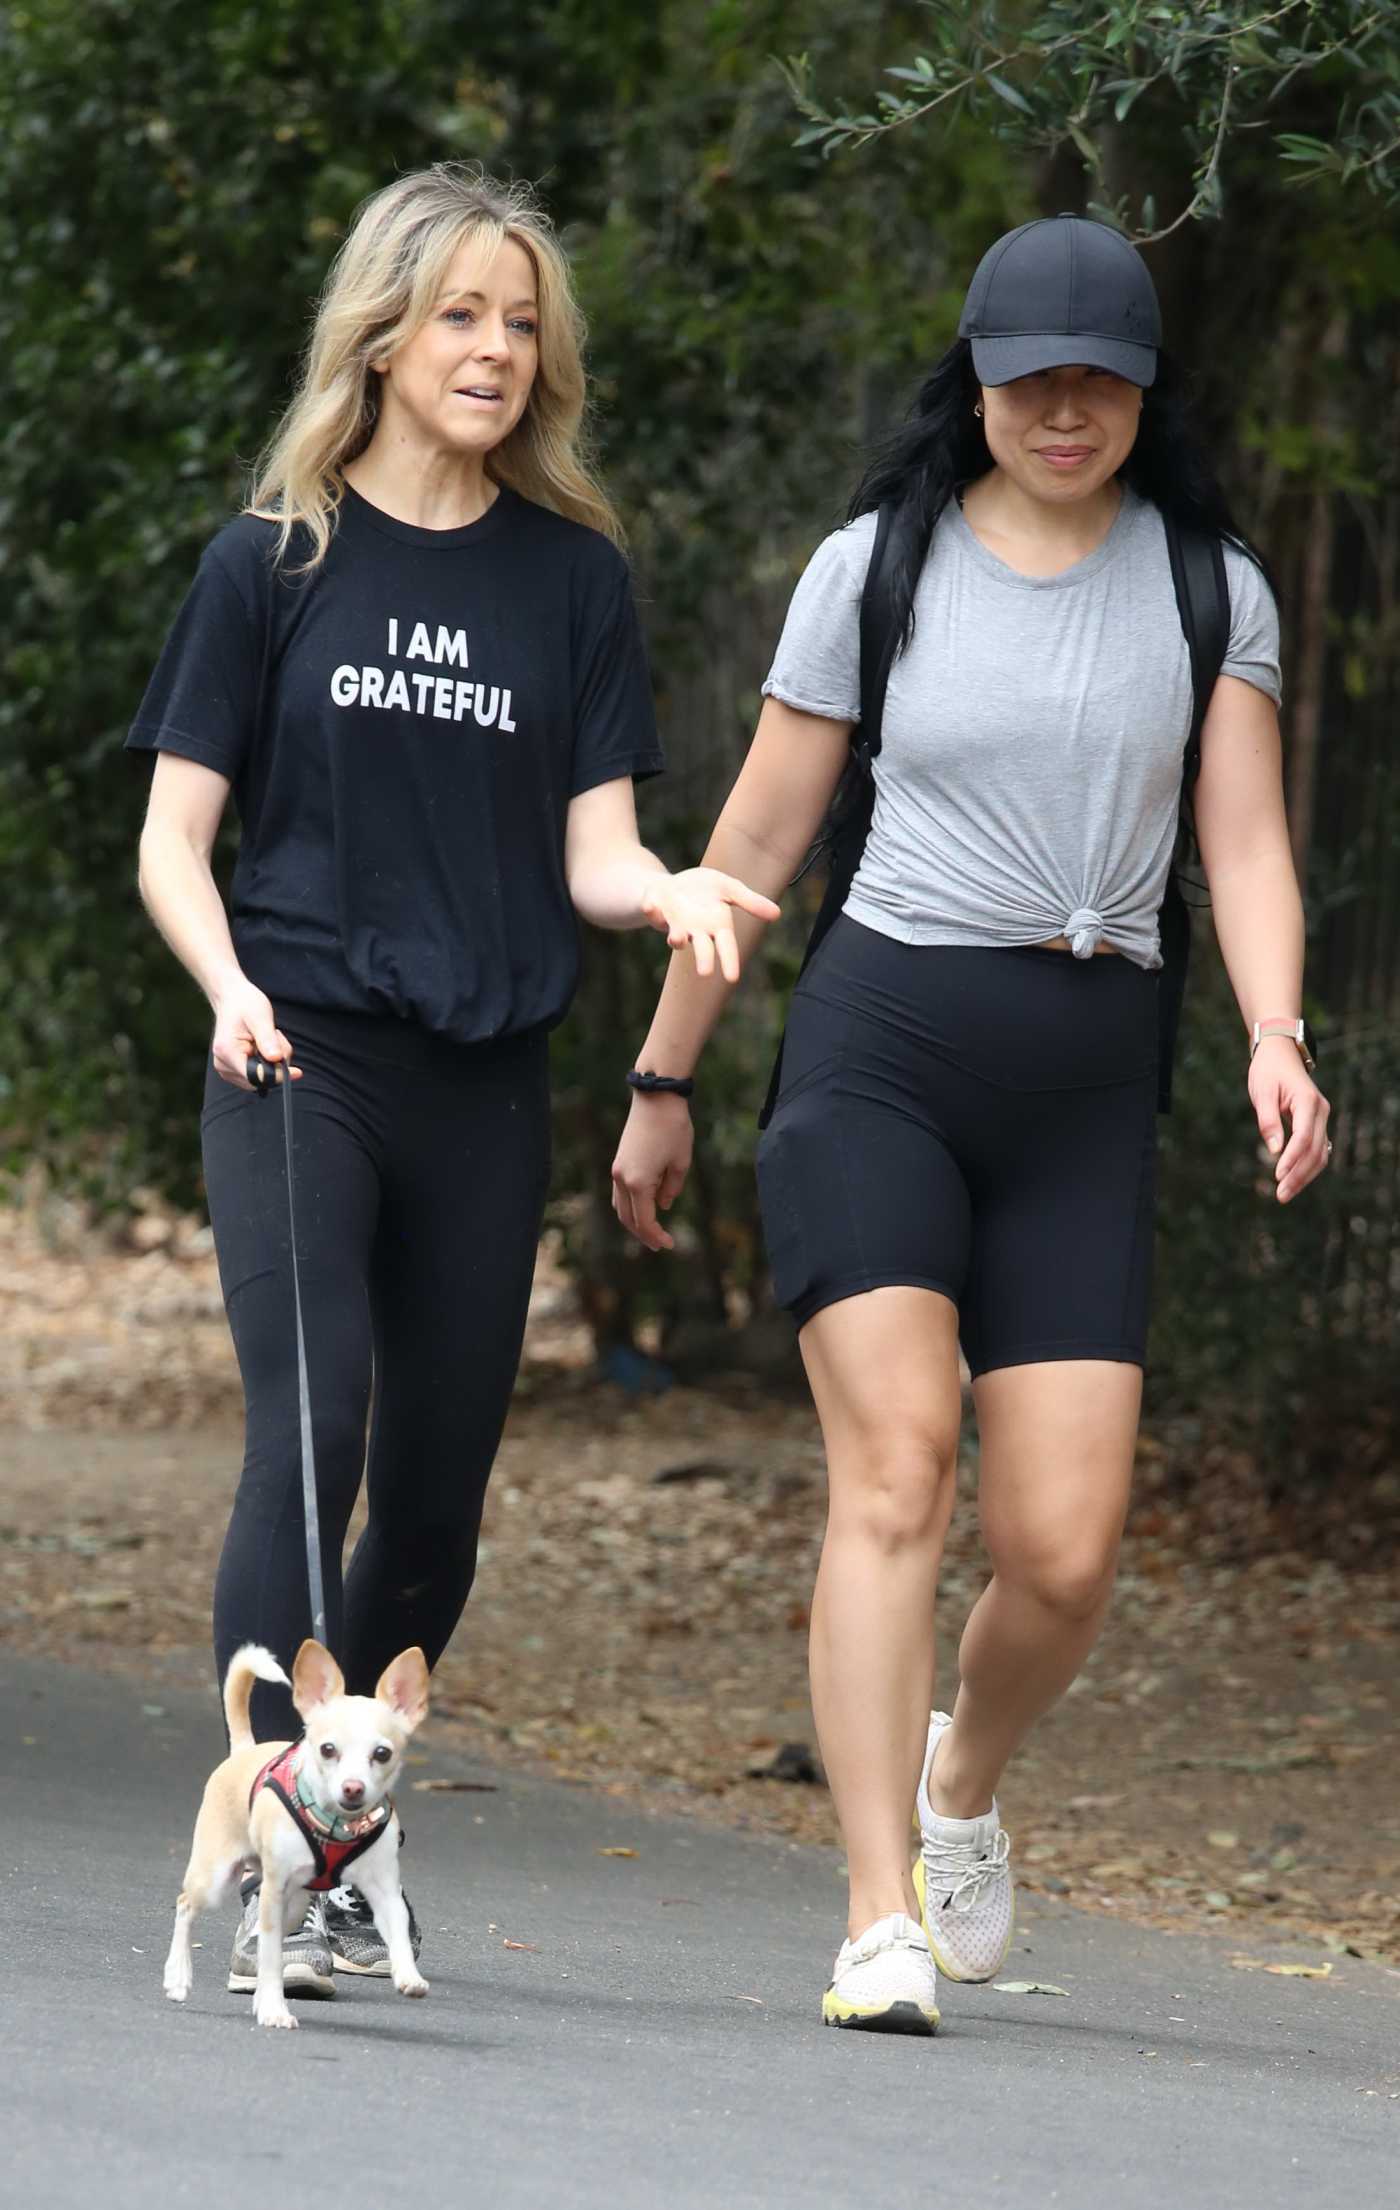 Lindsey Stirling in a Black Tee Steps Out for a Dog Walk with a Friend in Los Angeles 06/05/2022